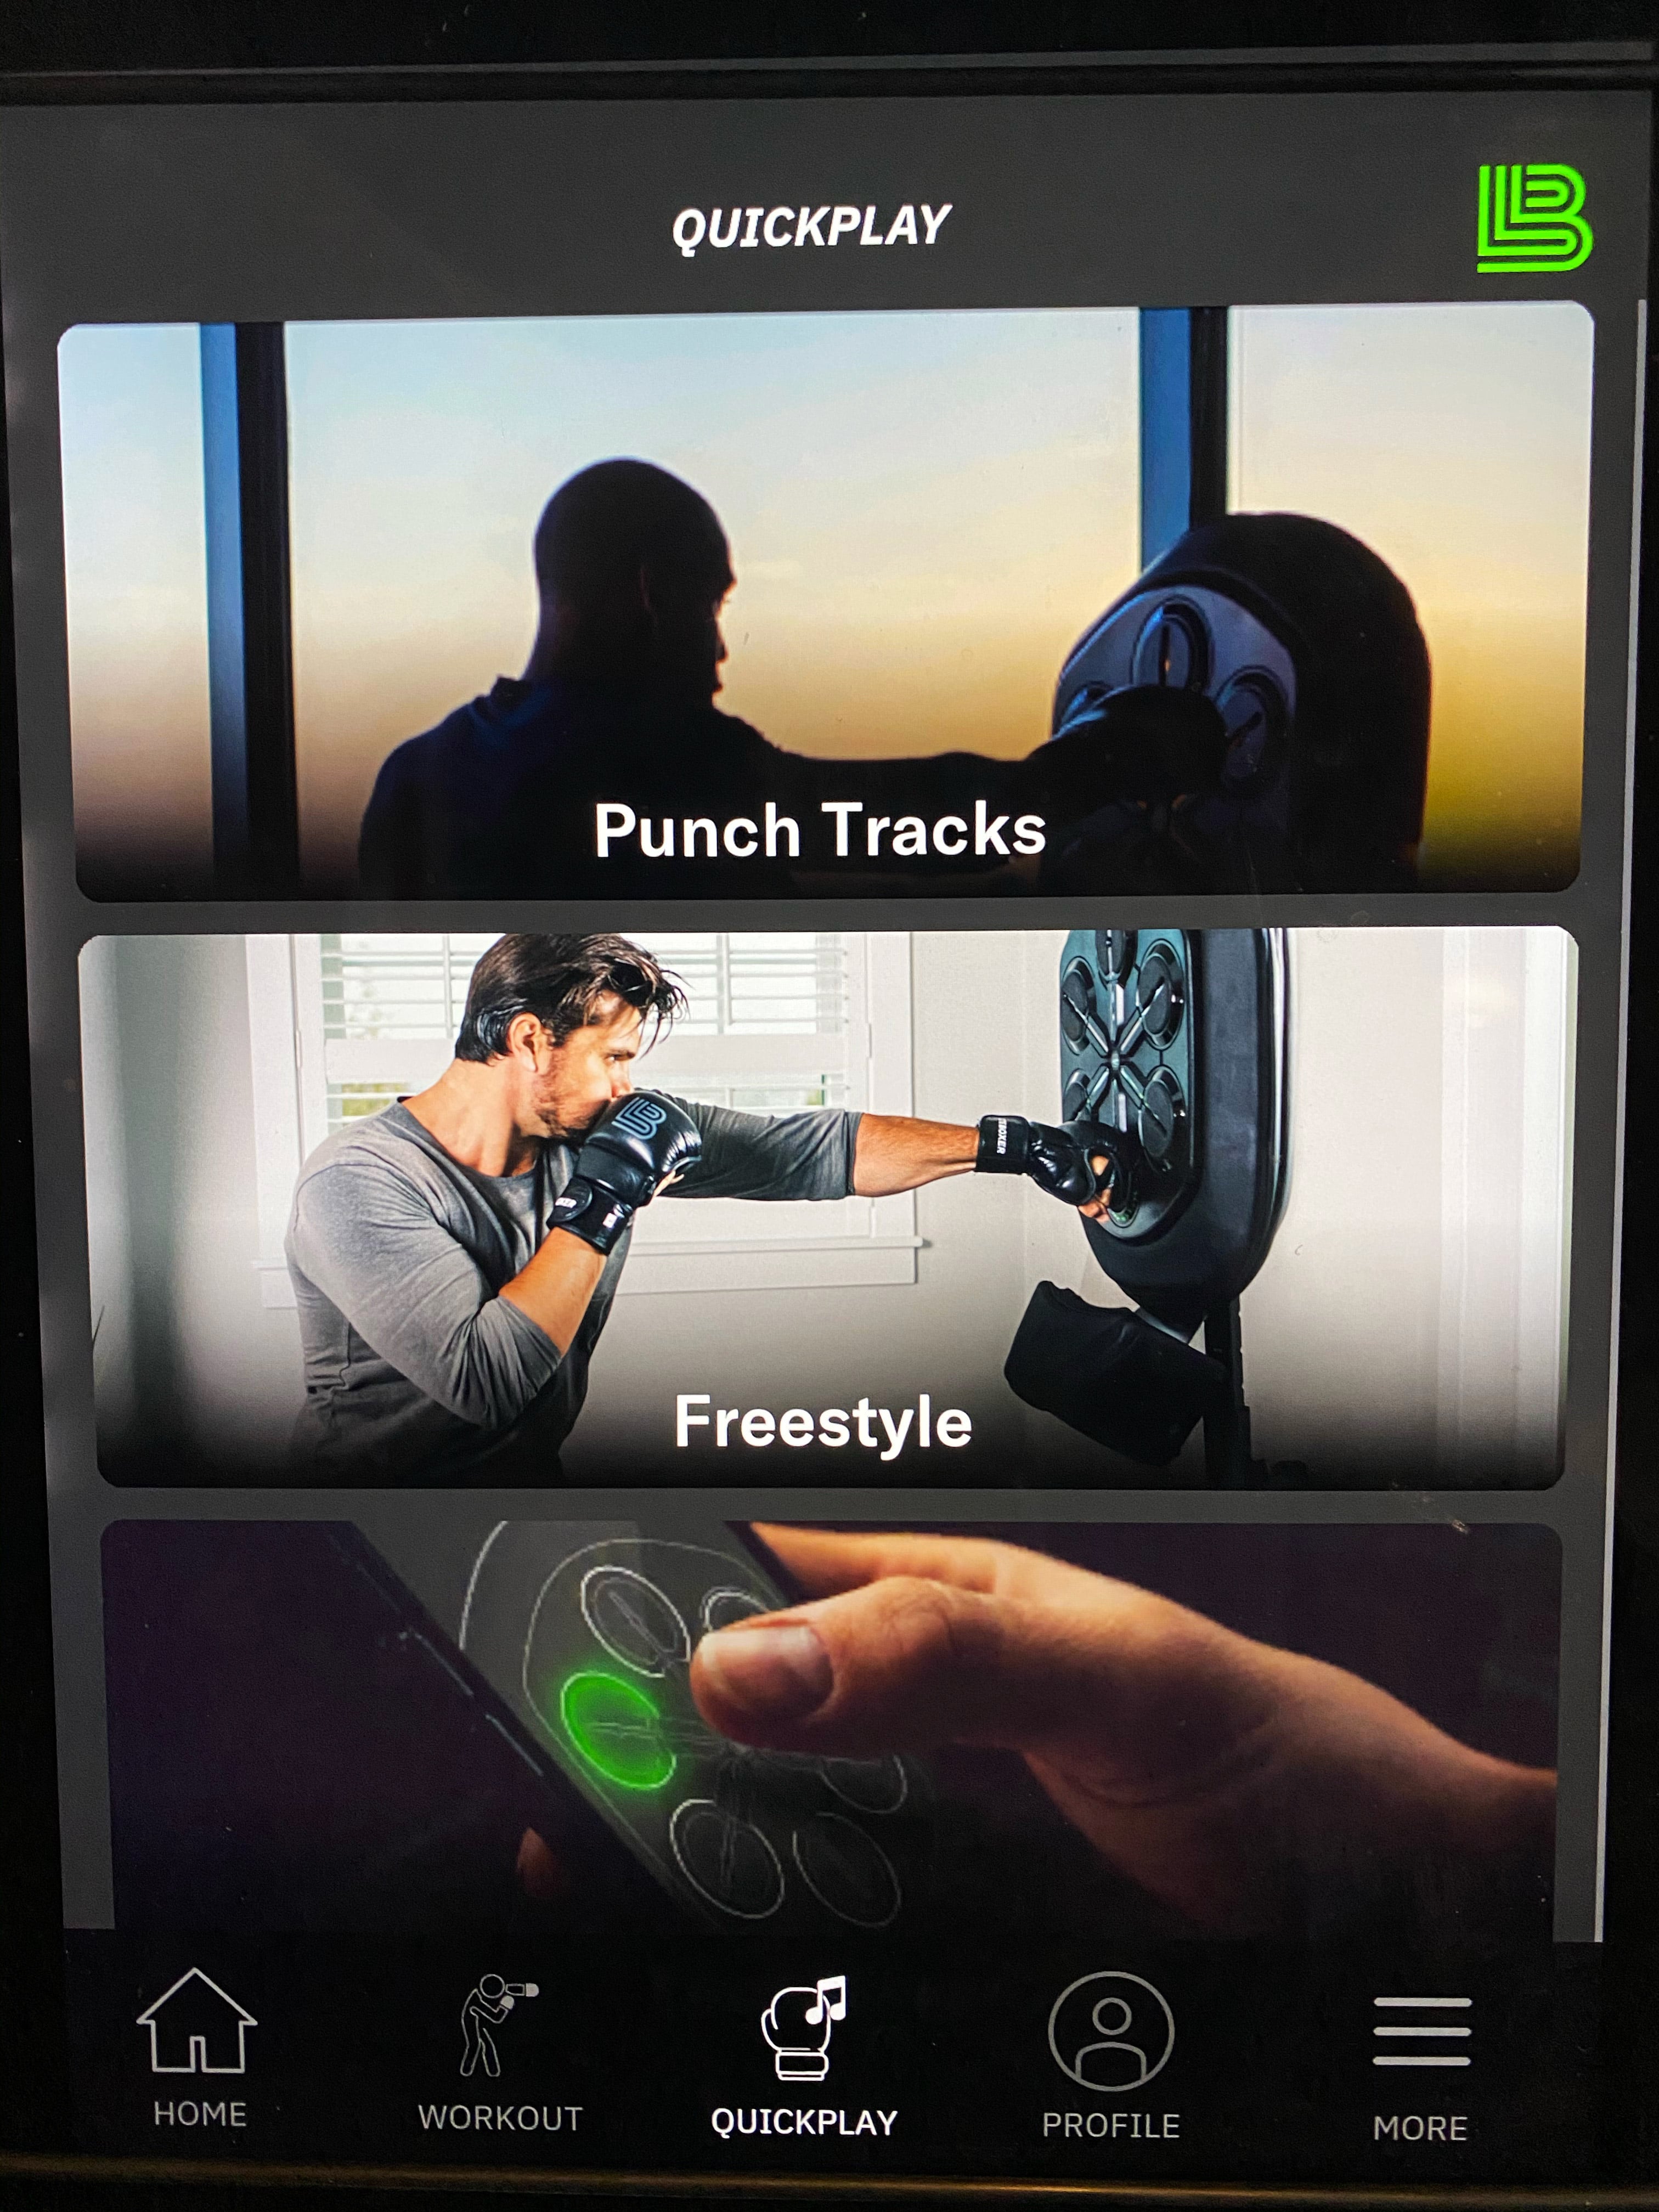 Liteboxer review: Get a fun home boxing workout with this smart